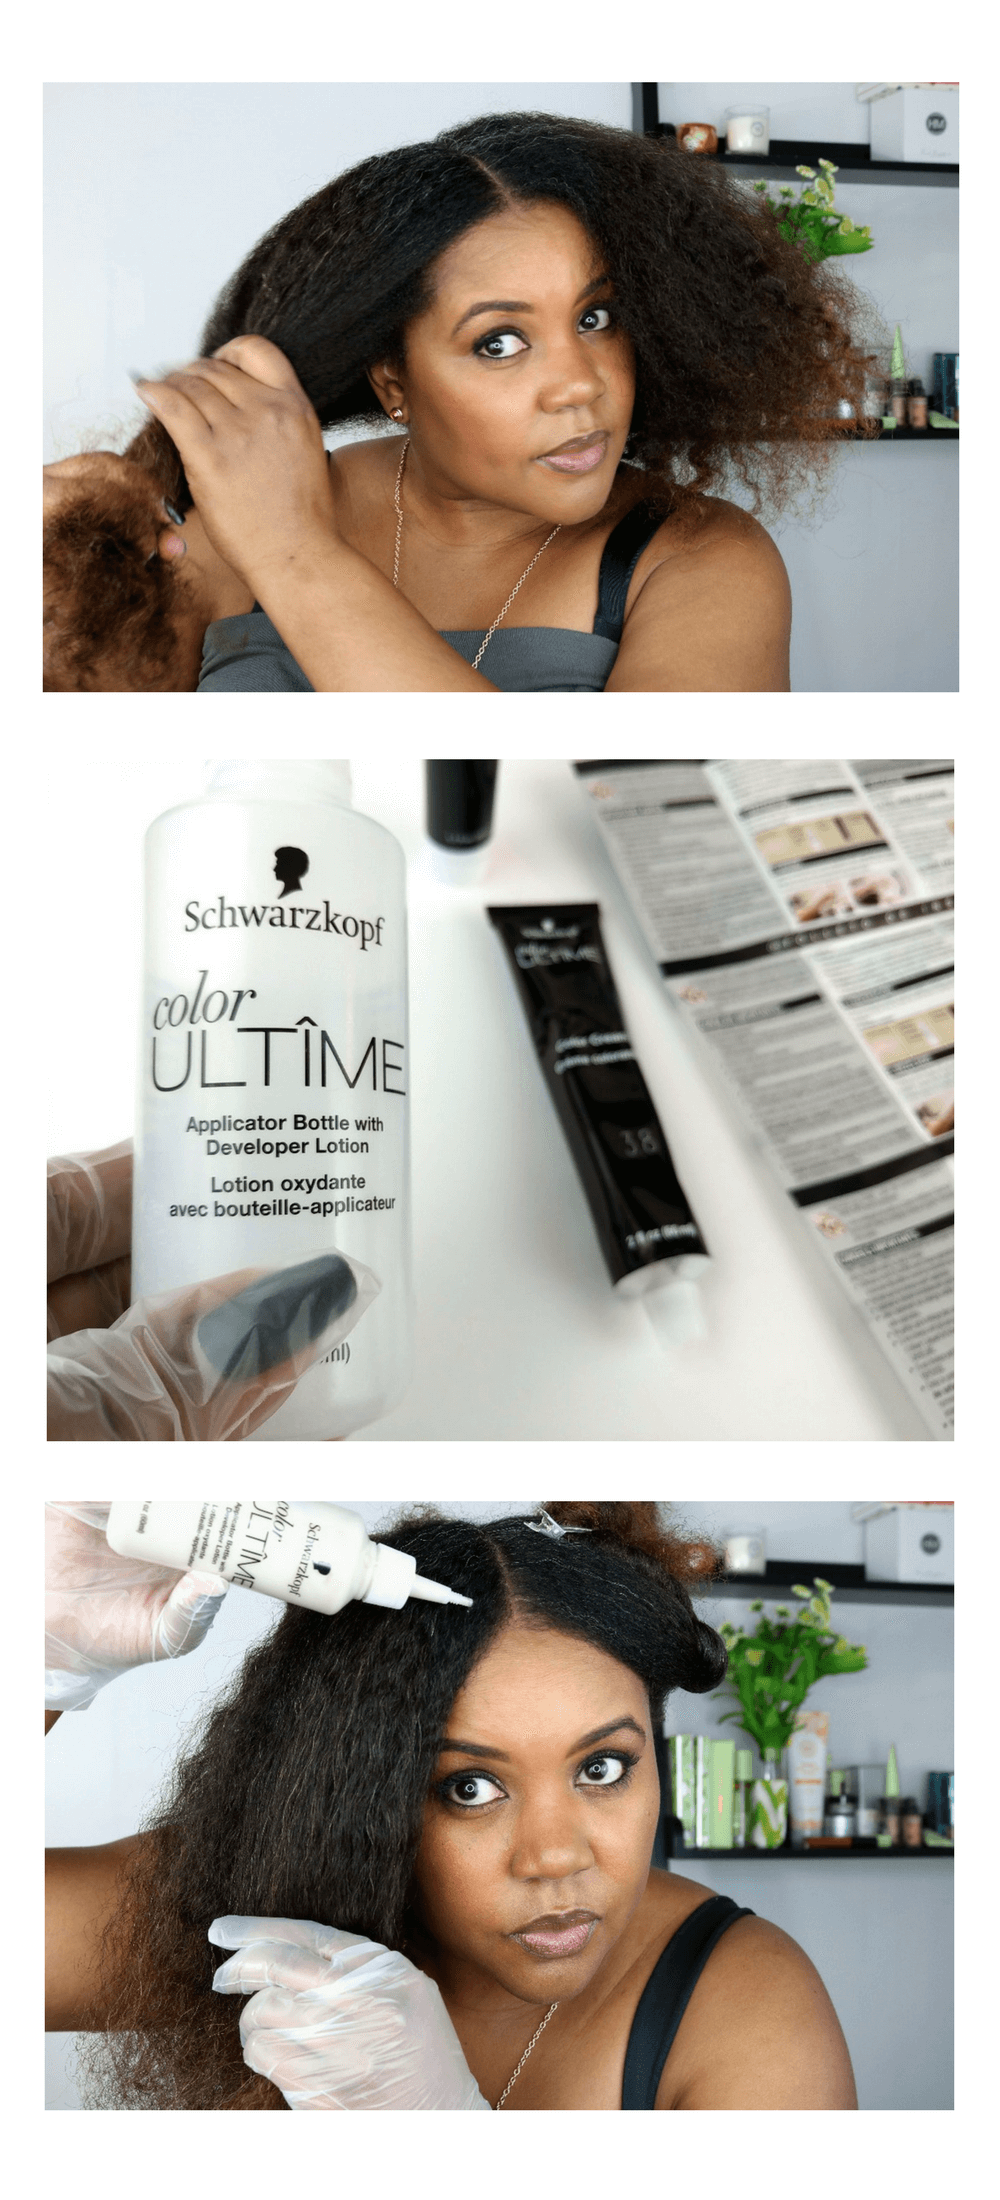 Get gorgeous professional hair color at home with Schwarzkopf Color Ultime permanent hair color.